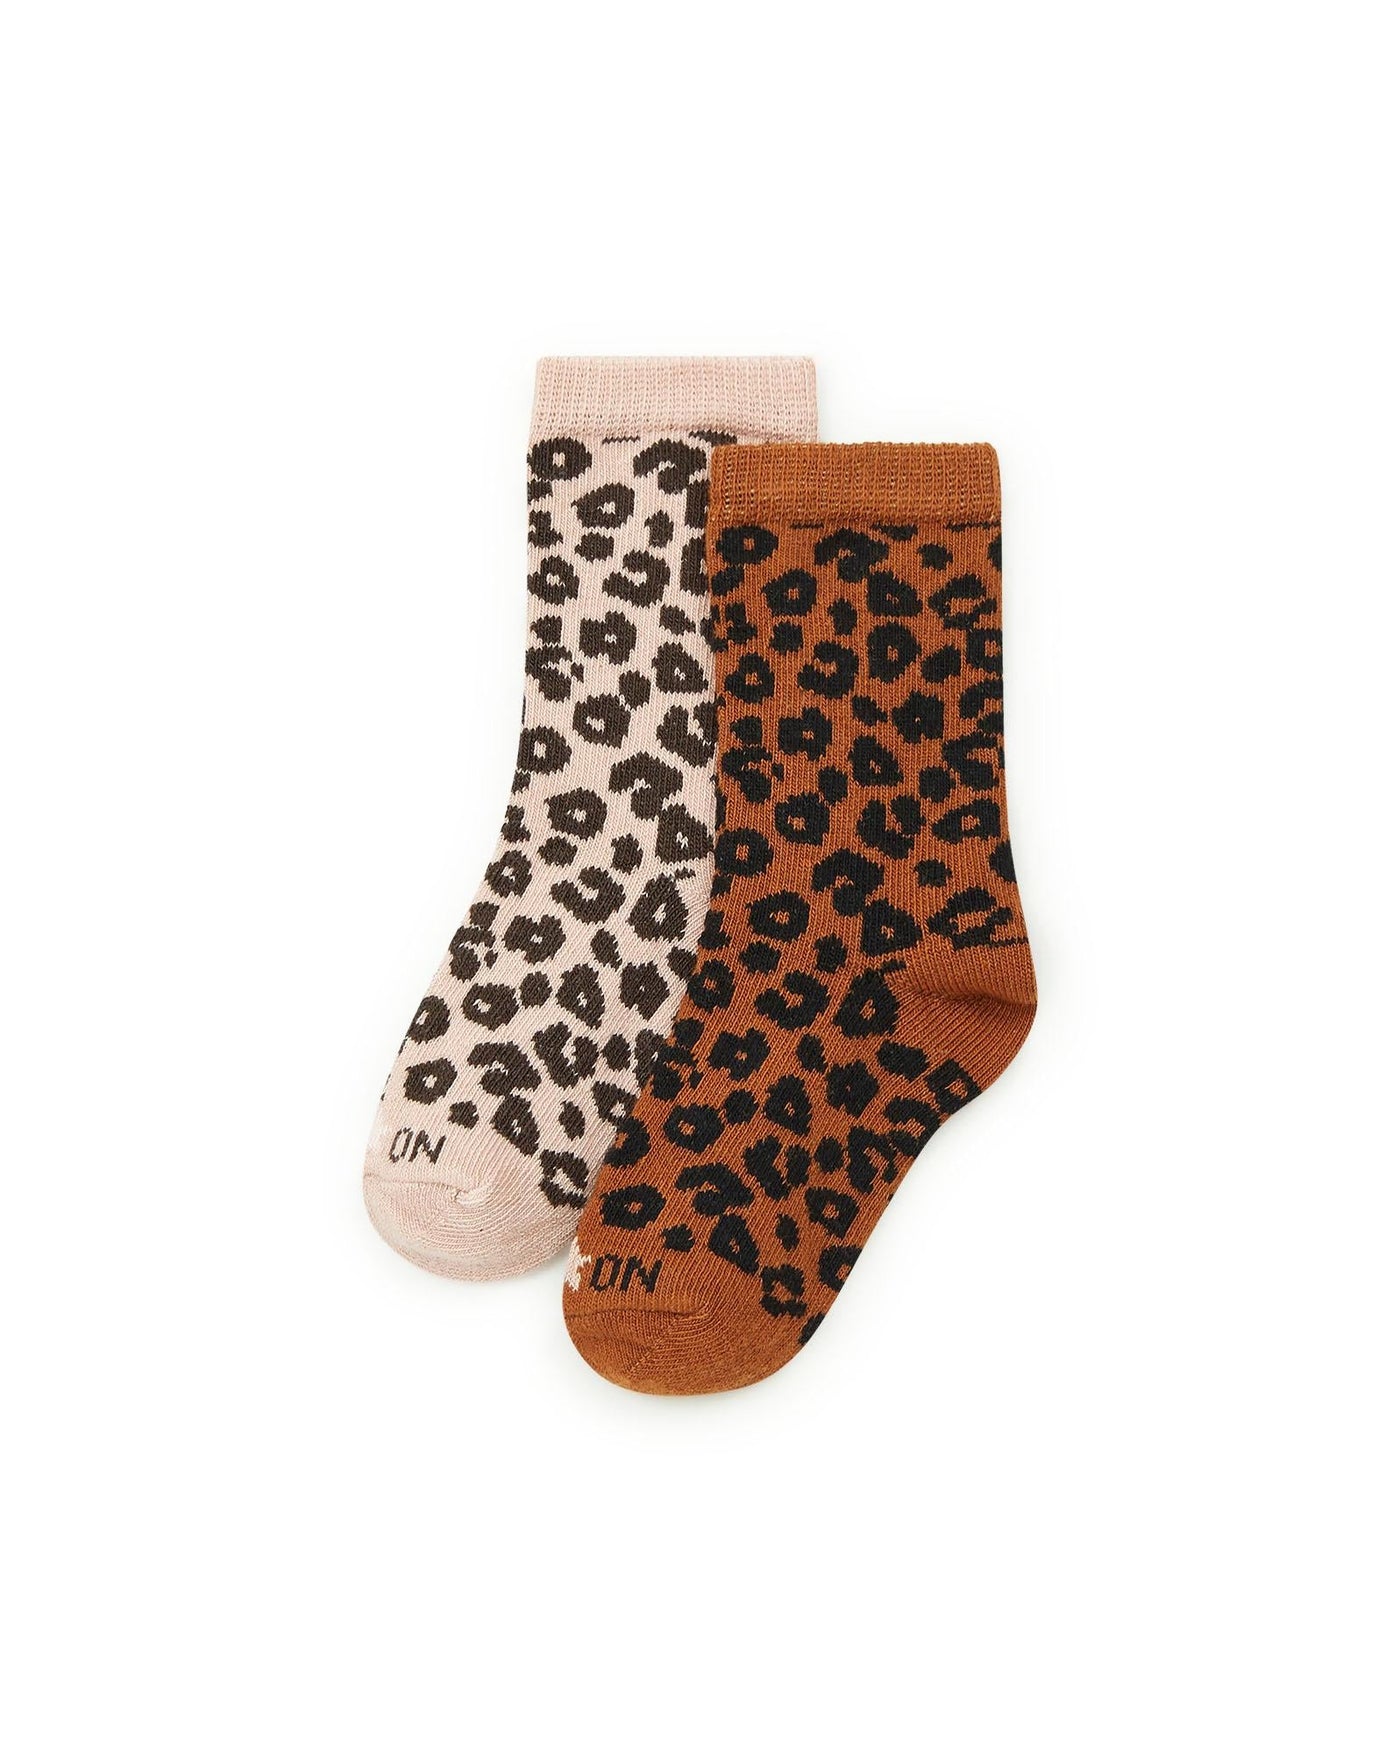 Pack of Two Socks in Leopard Rose